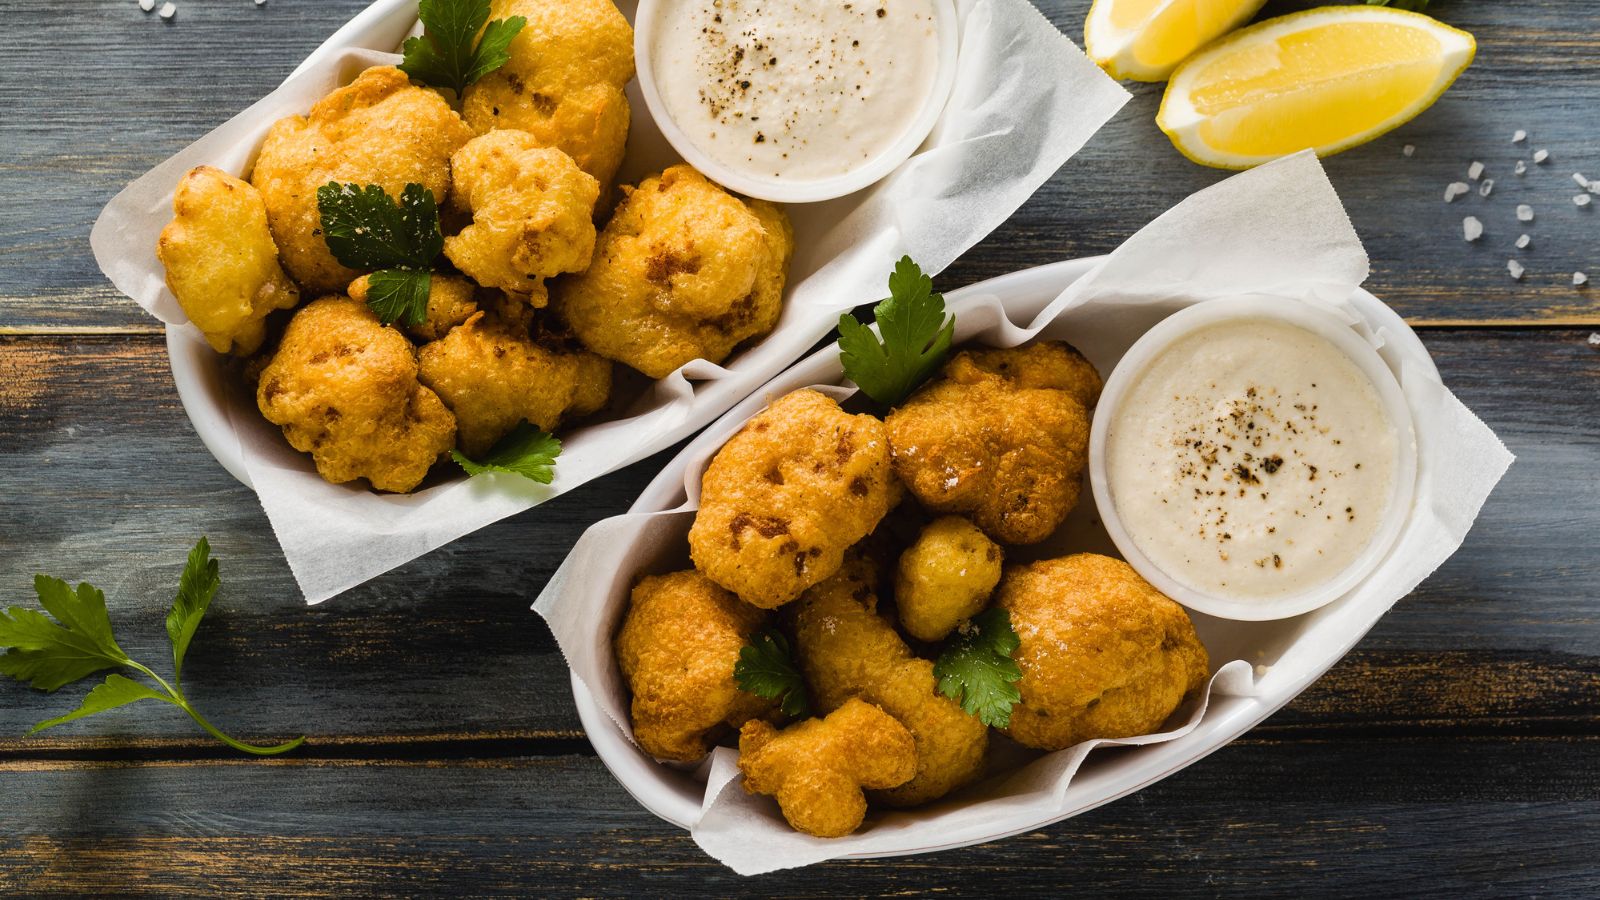 Unlock Your Kitchen Potential With These 20 Unforgettable Cauliflower Recipes